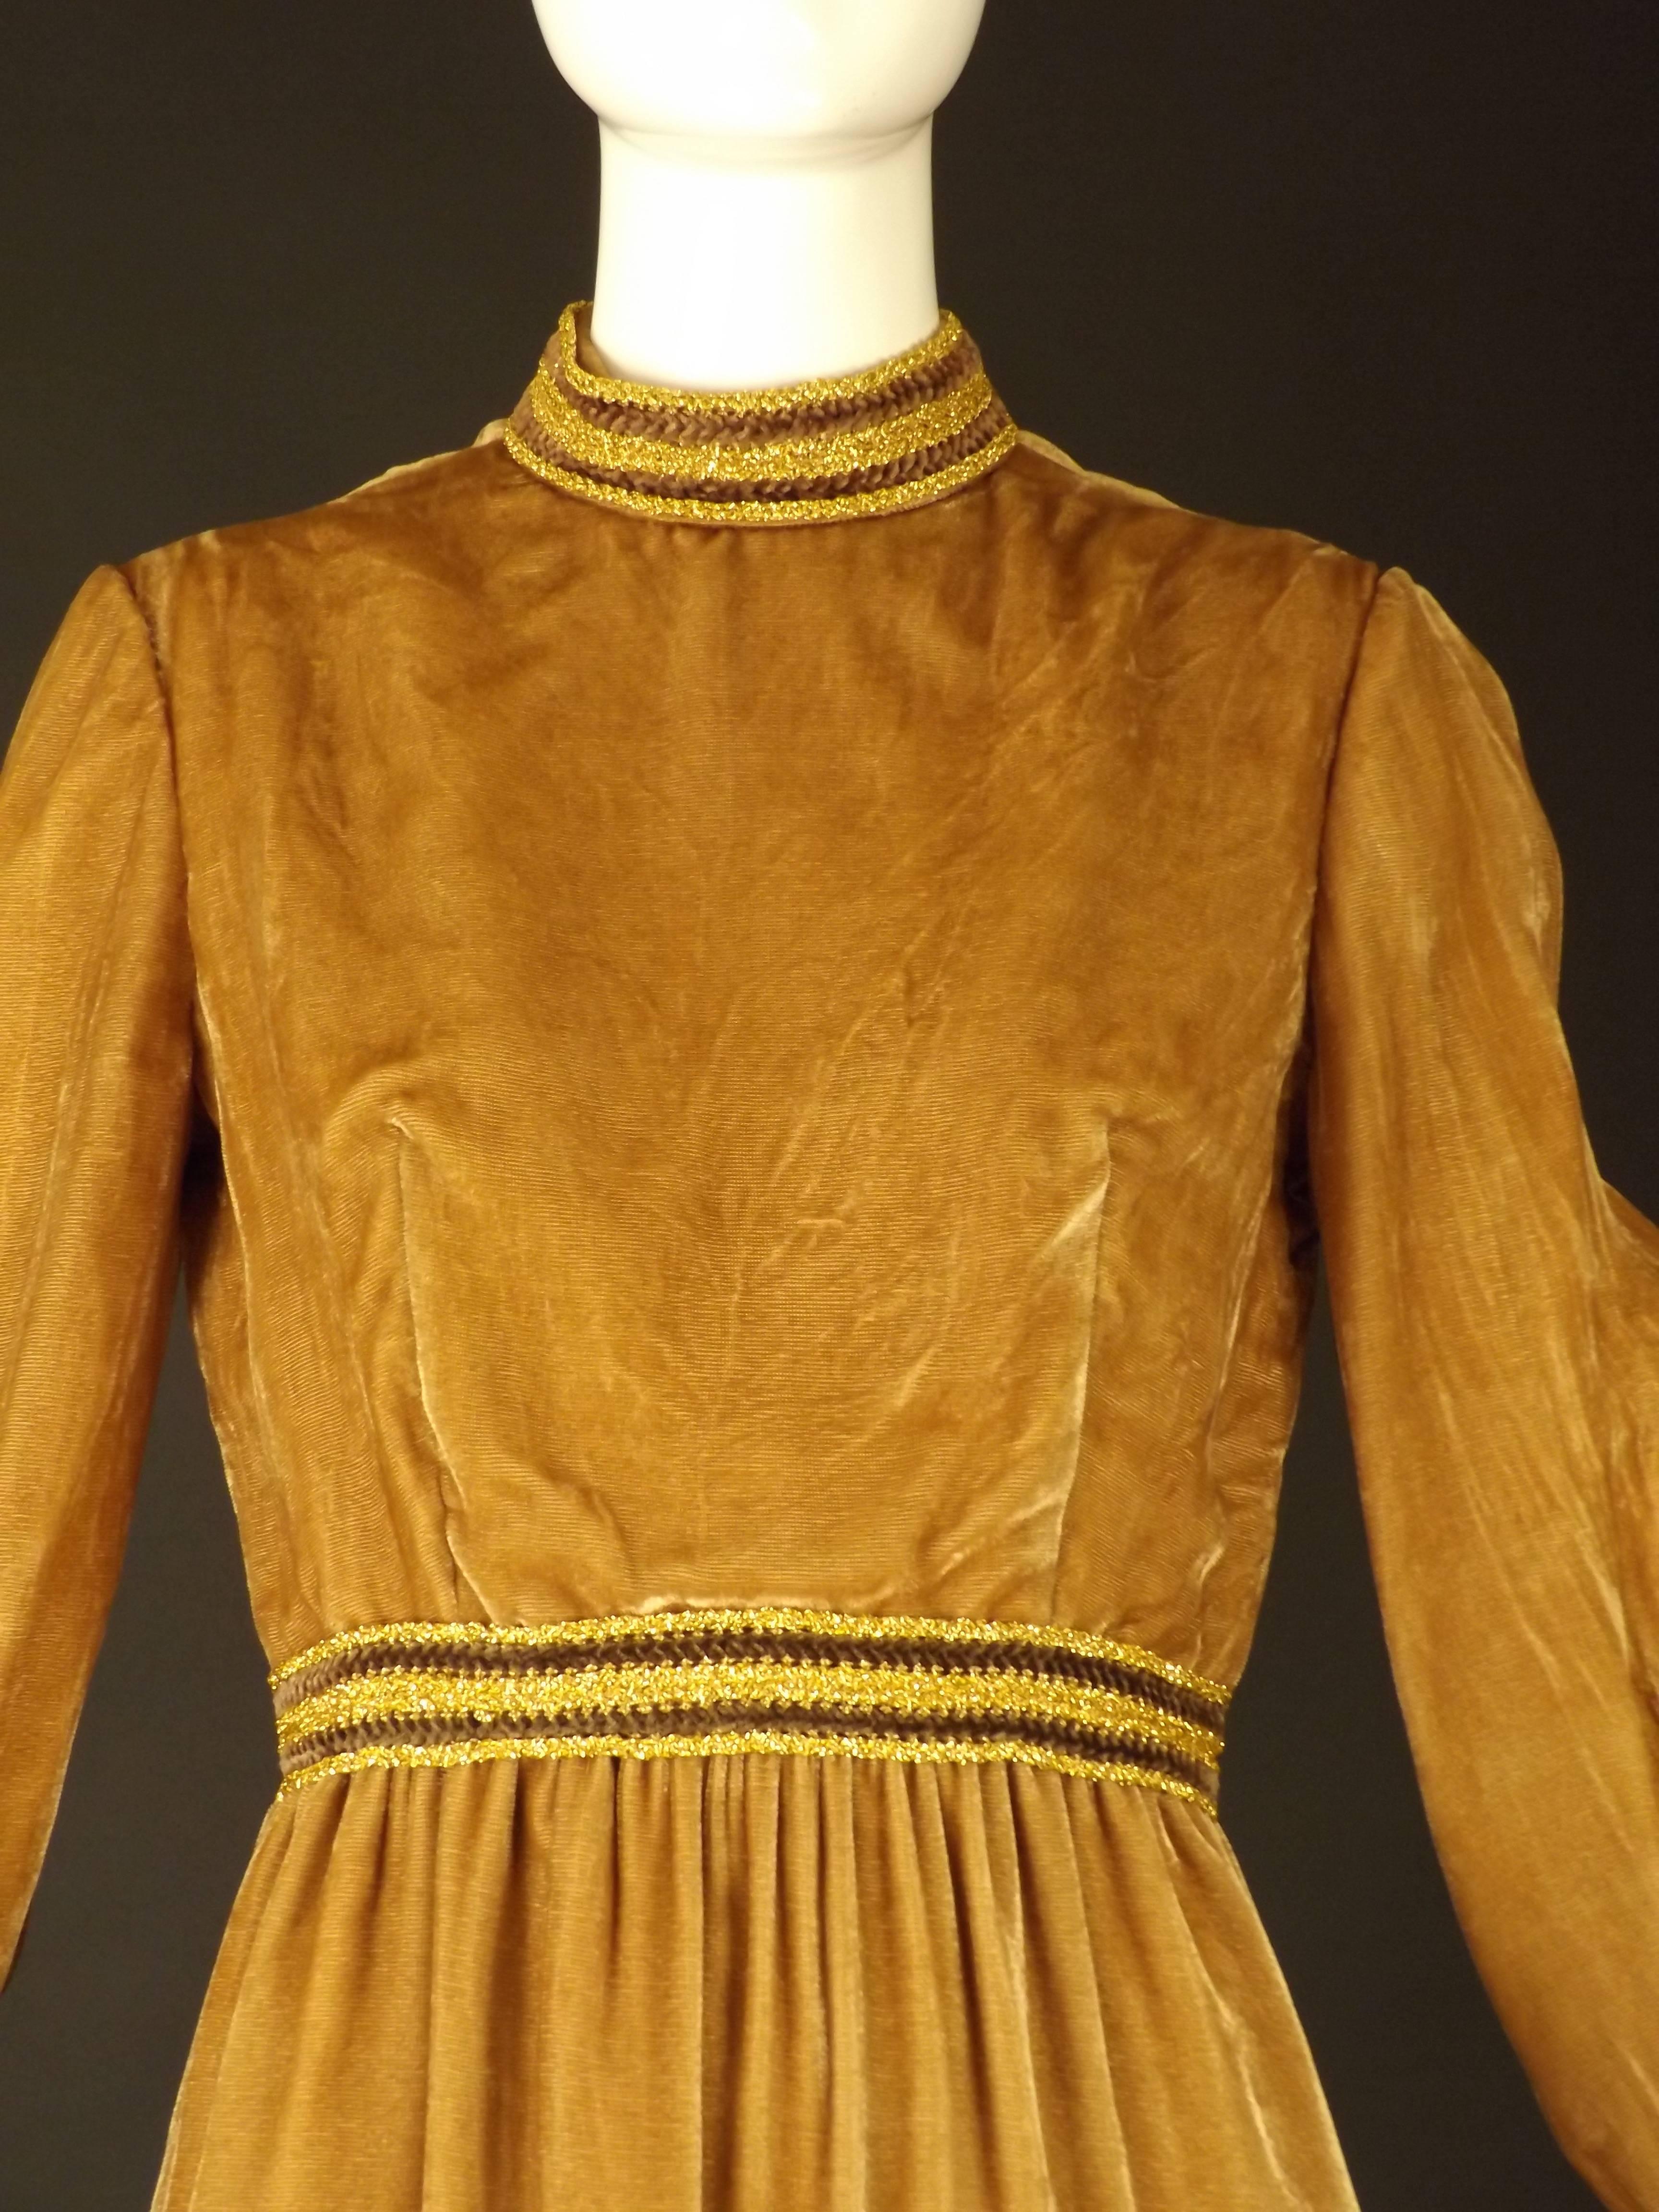 Late 1960s/early 1970s dinner dress in a camel colored textured velvet. The dress has a stand collar adorned in a gold lurex and brown chenille trimming. The bodice is dart fitted from the bust points to the natural waistline seam, that is also